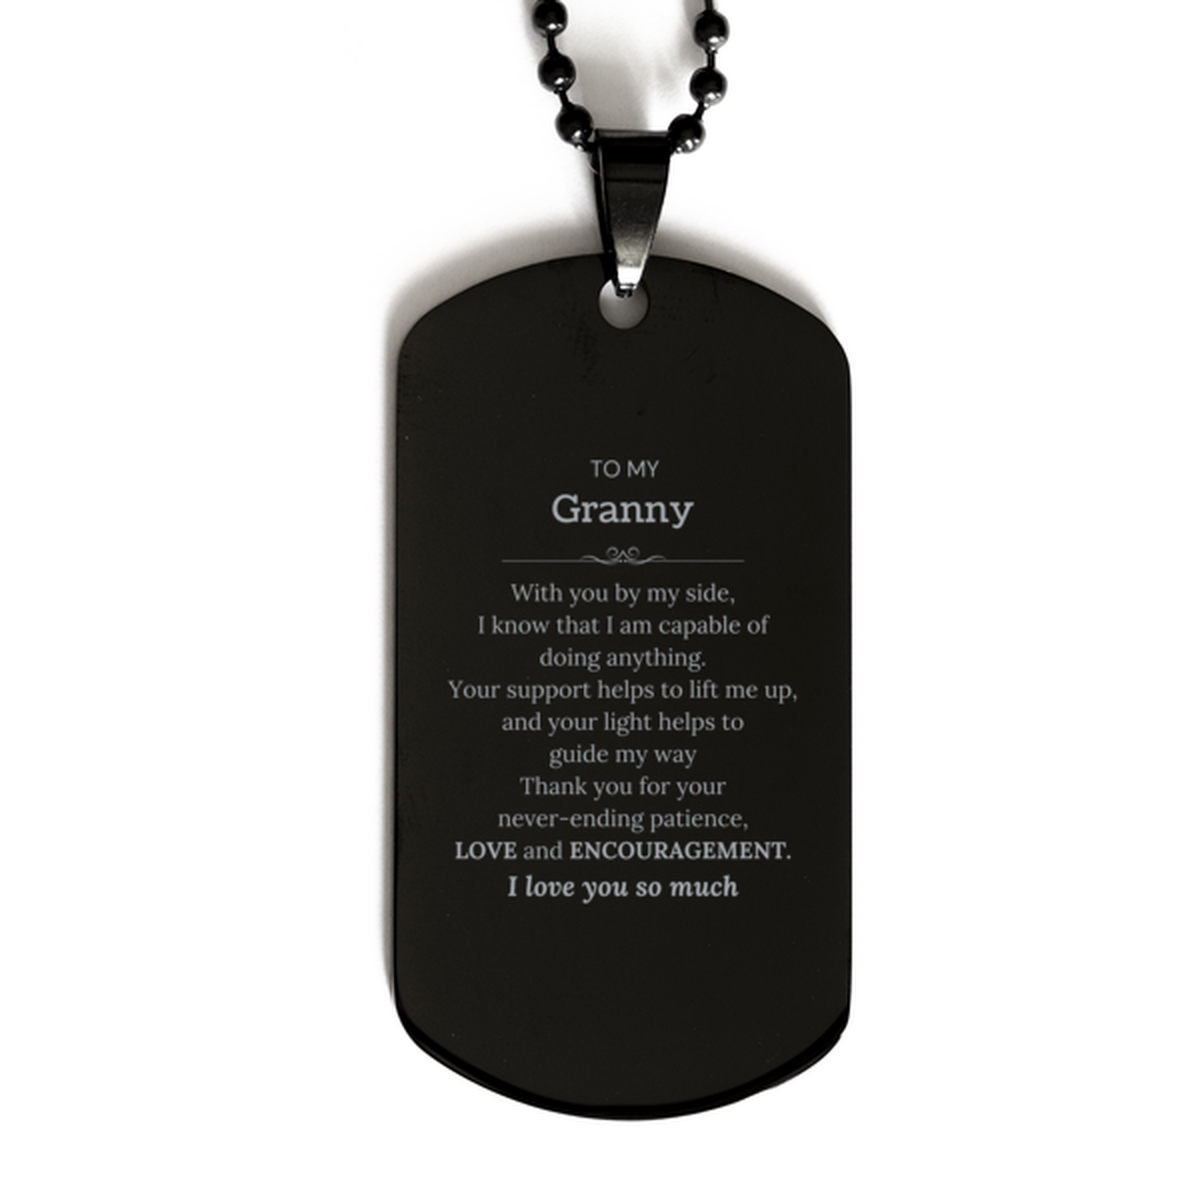 Appreciation Granny Black Dog Tag Gifts, To My Granny Birthday Christmas Wedding Keepsake Gifts for Granny With you by my side, I know that I am capable of doing anything. I love you so much